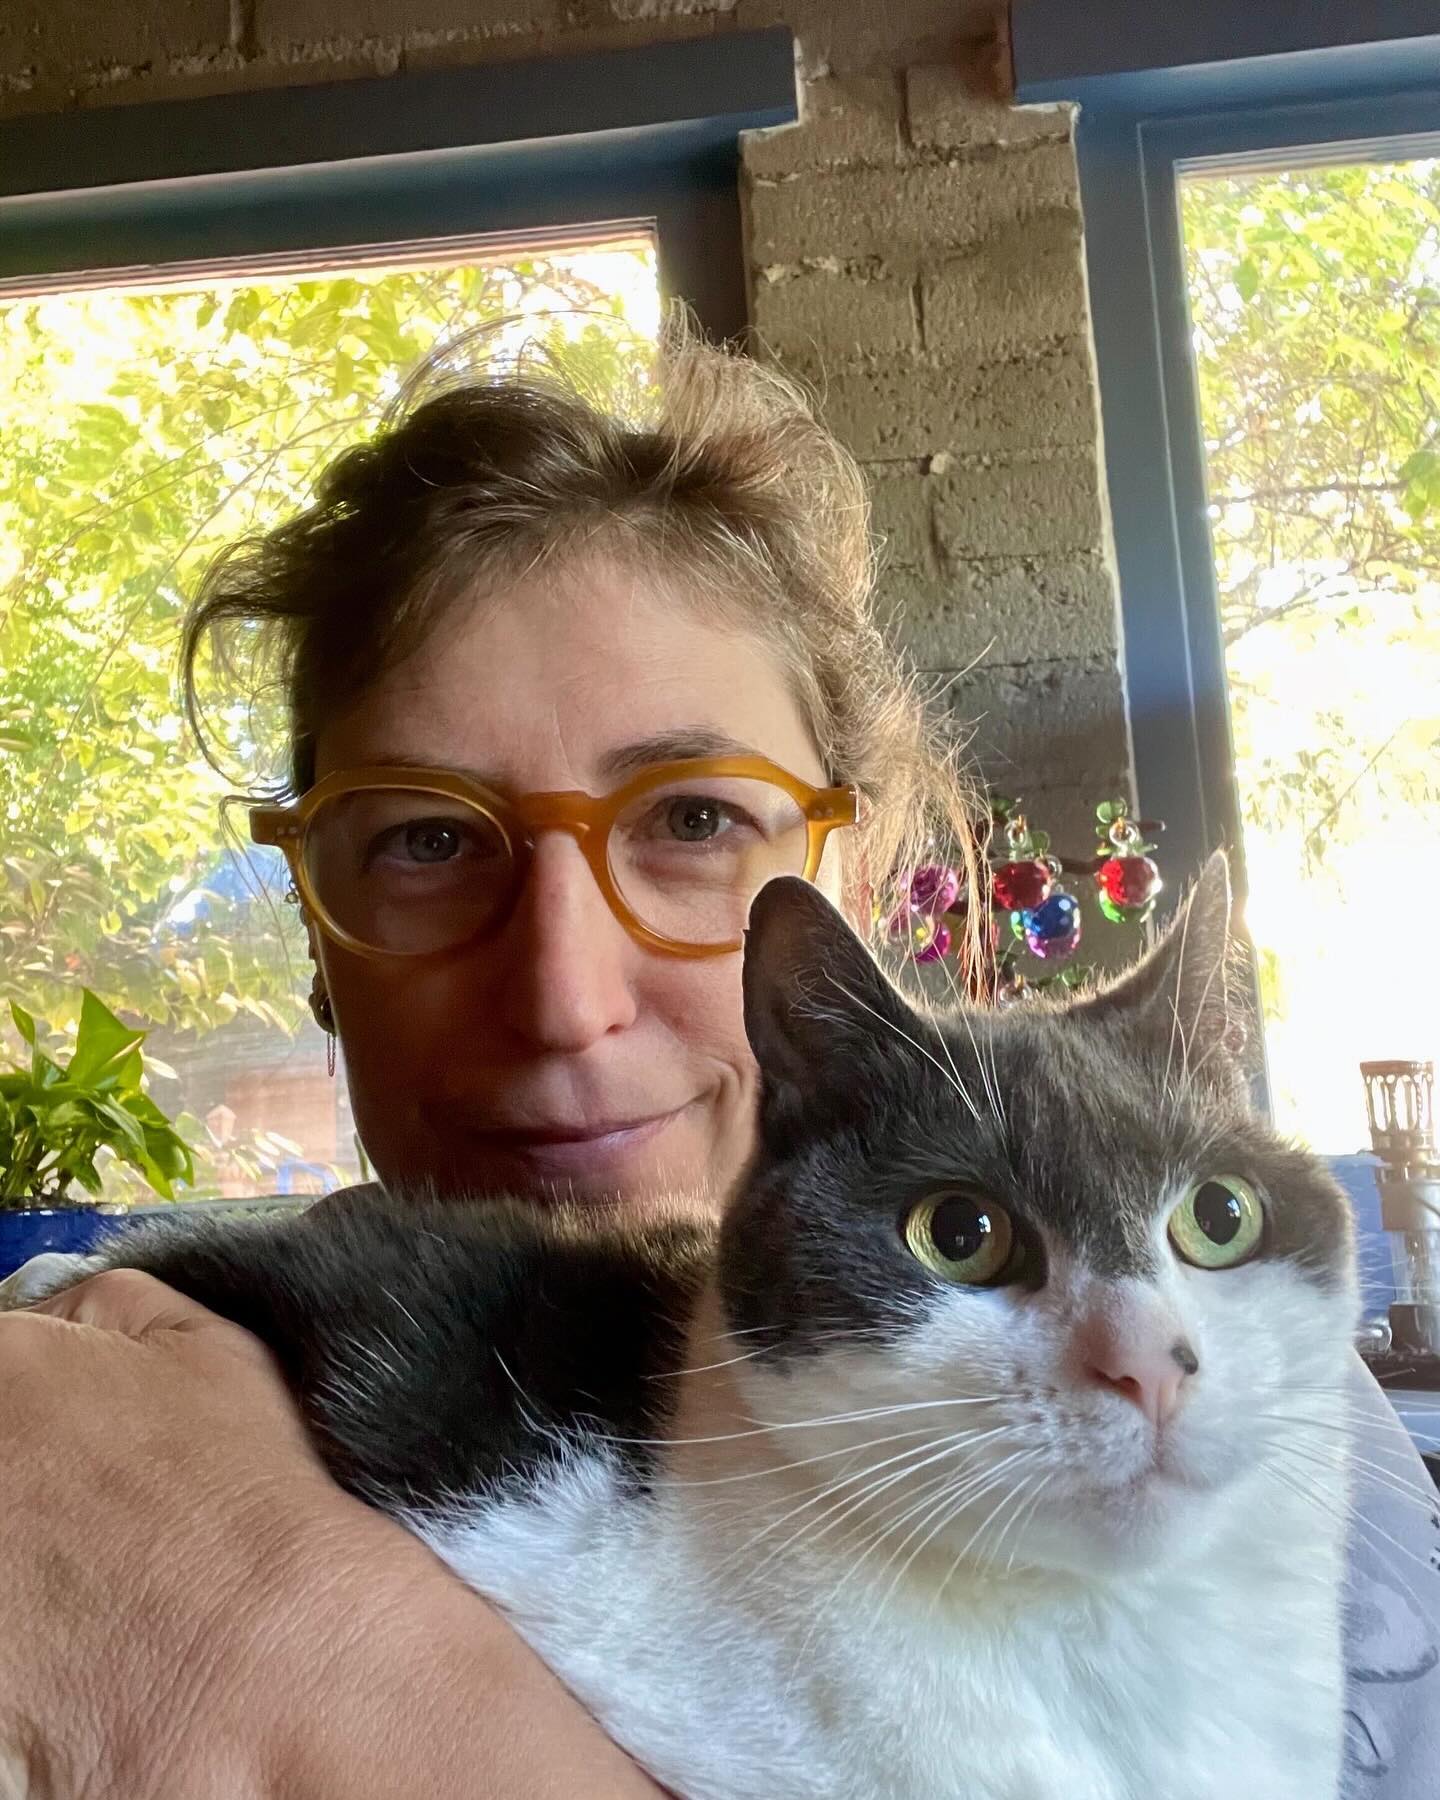 In her first photo since the bombshell news, she found comfort in her cat Addie